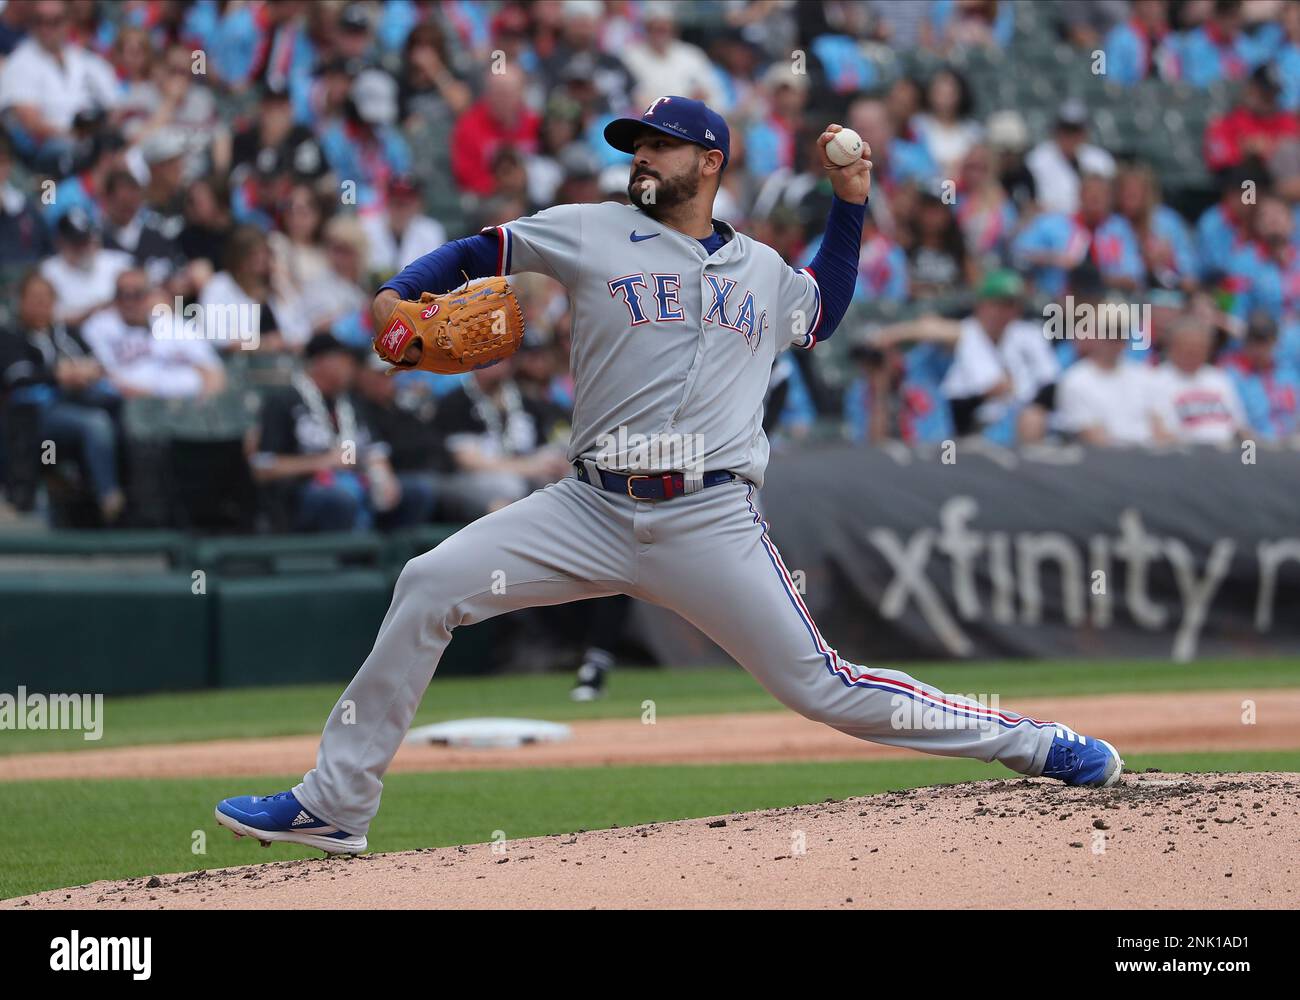 CHICAGO, IL - JUNE 11: Texas Rangers starting pitcher Martin Perez (54)  delivers a pitch during a Major League Baseball game between the Texas  Rangers and the Chicago White Sox on June